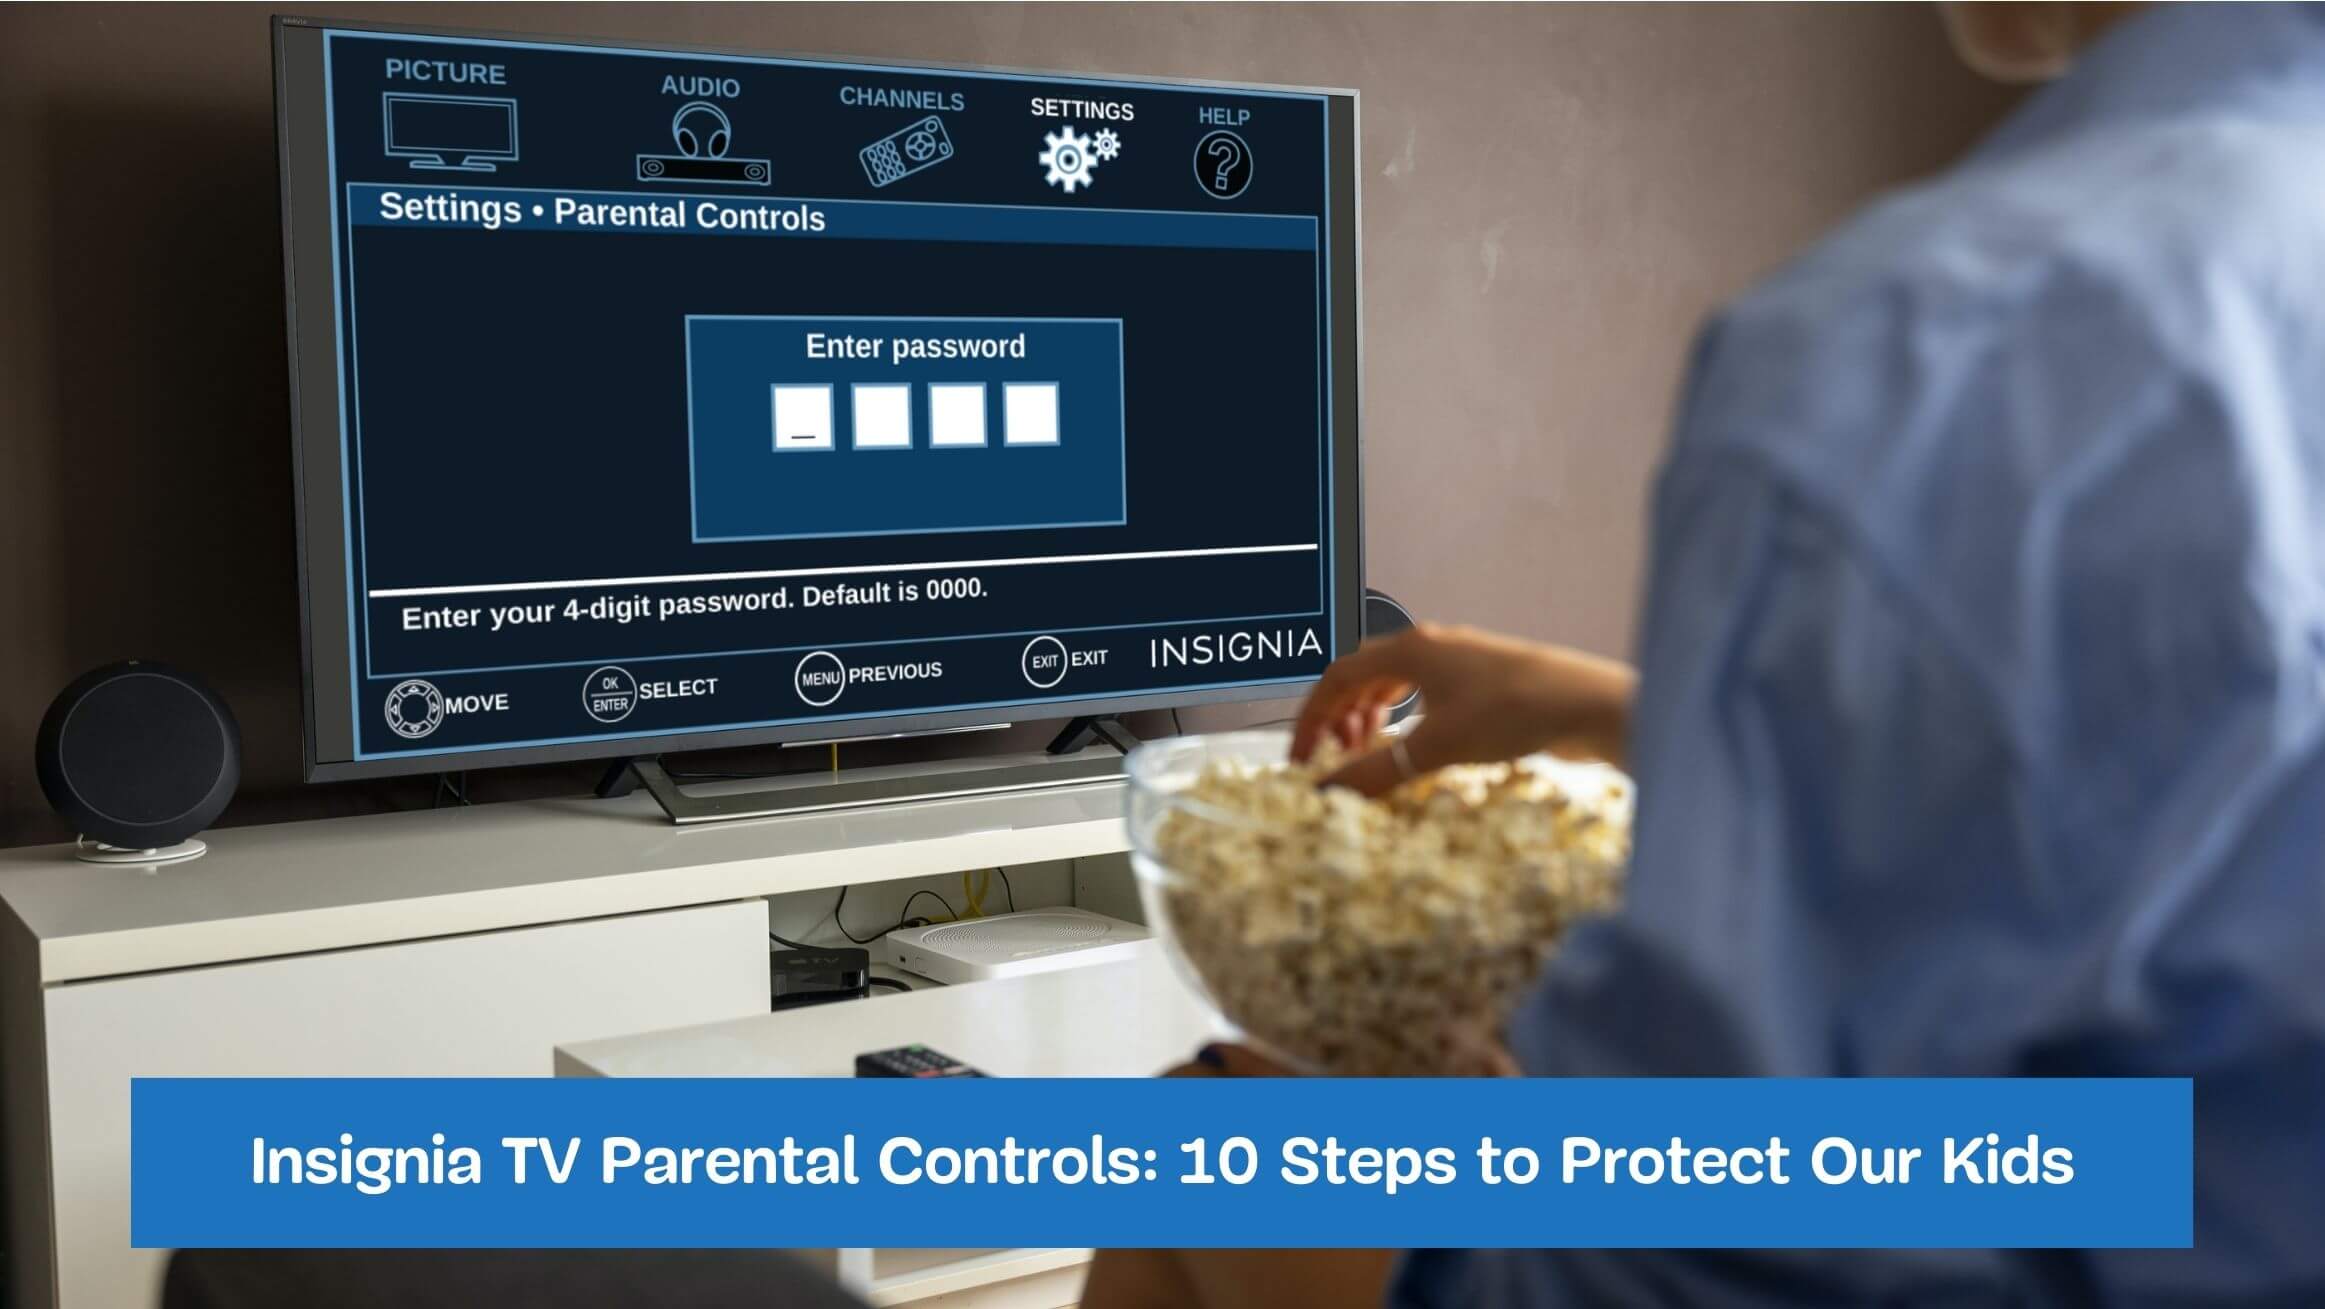 Insignia TV Parental Controls: 10 Steps to Protect Our Kids